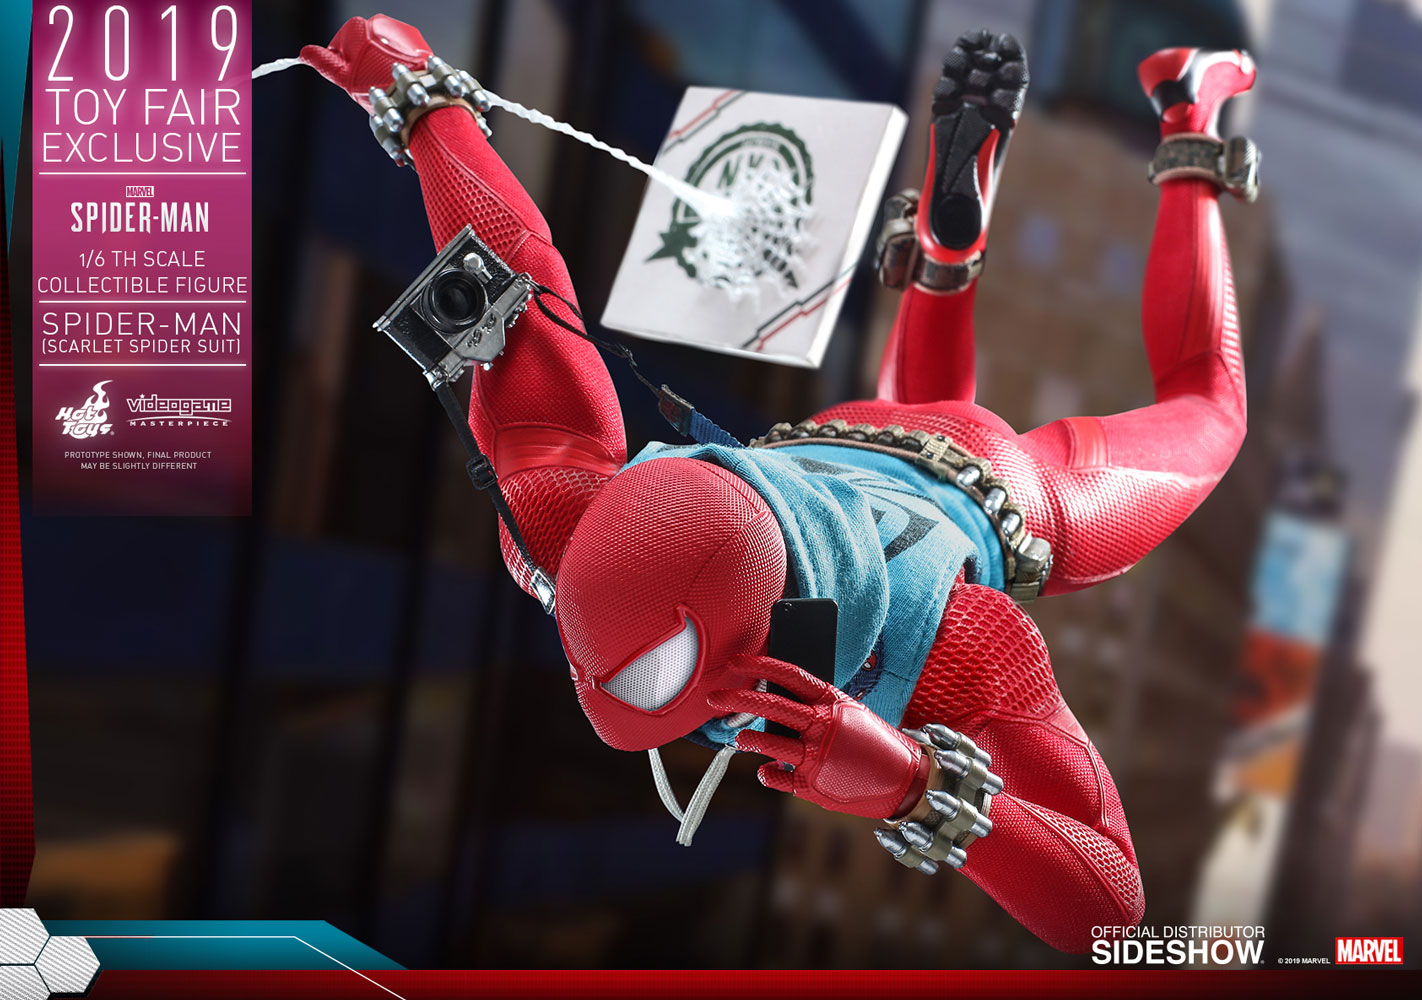 Spider-Man (Scarlet Spider Suit) Exclusive Edition (Prototype Shown) View 19